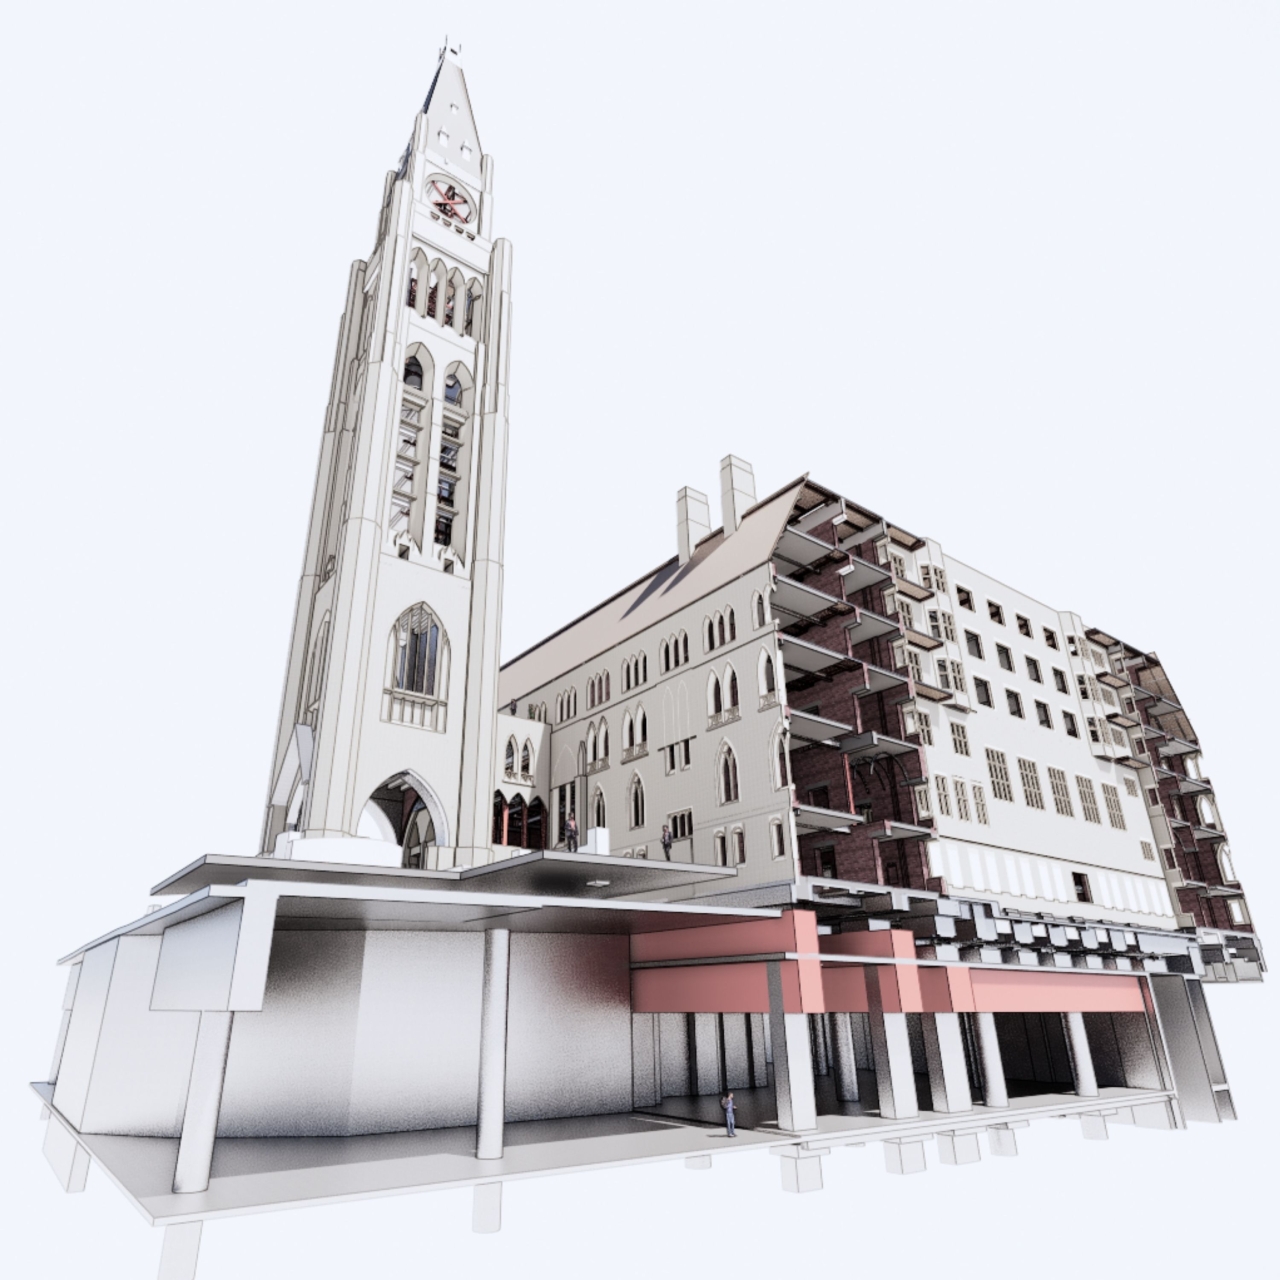 3D architectural image of a church with above and under ground structures